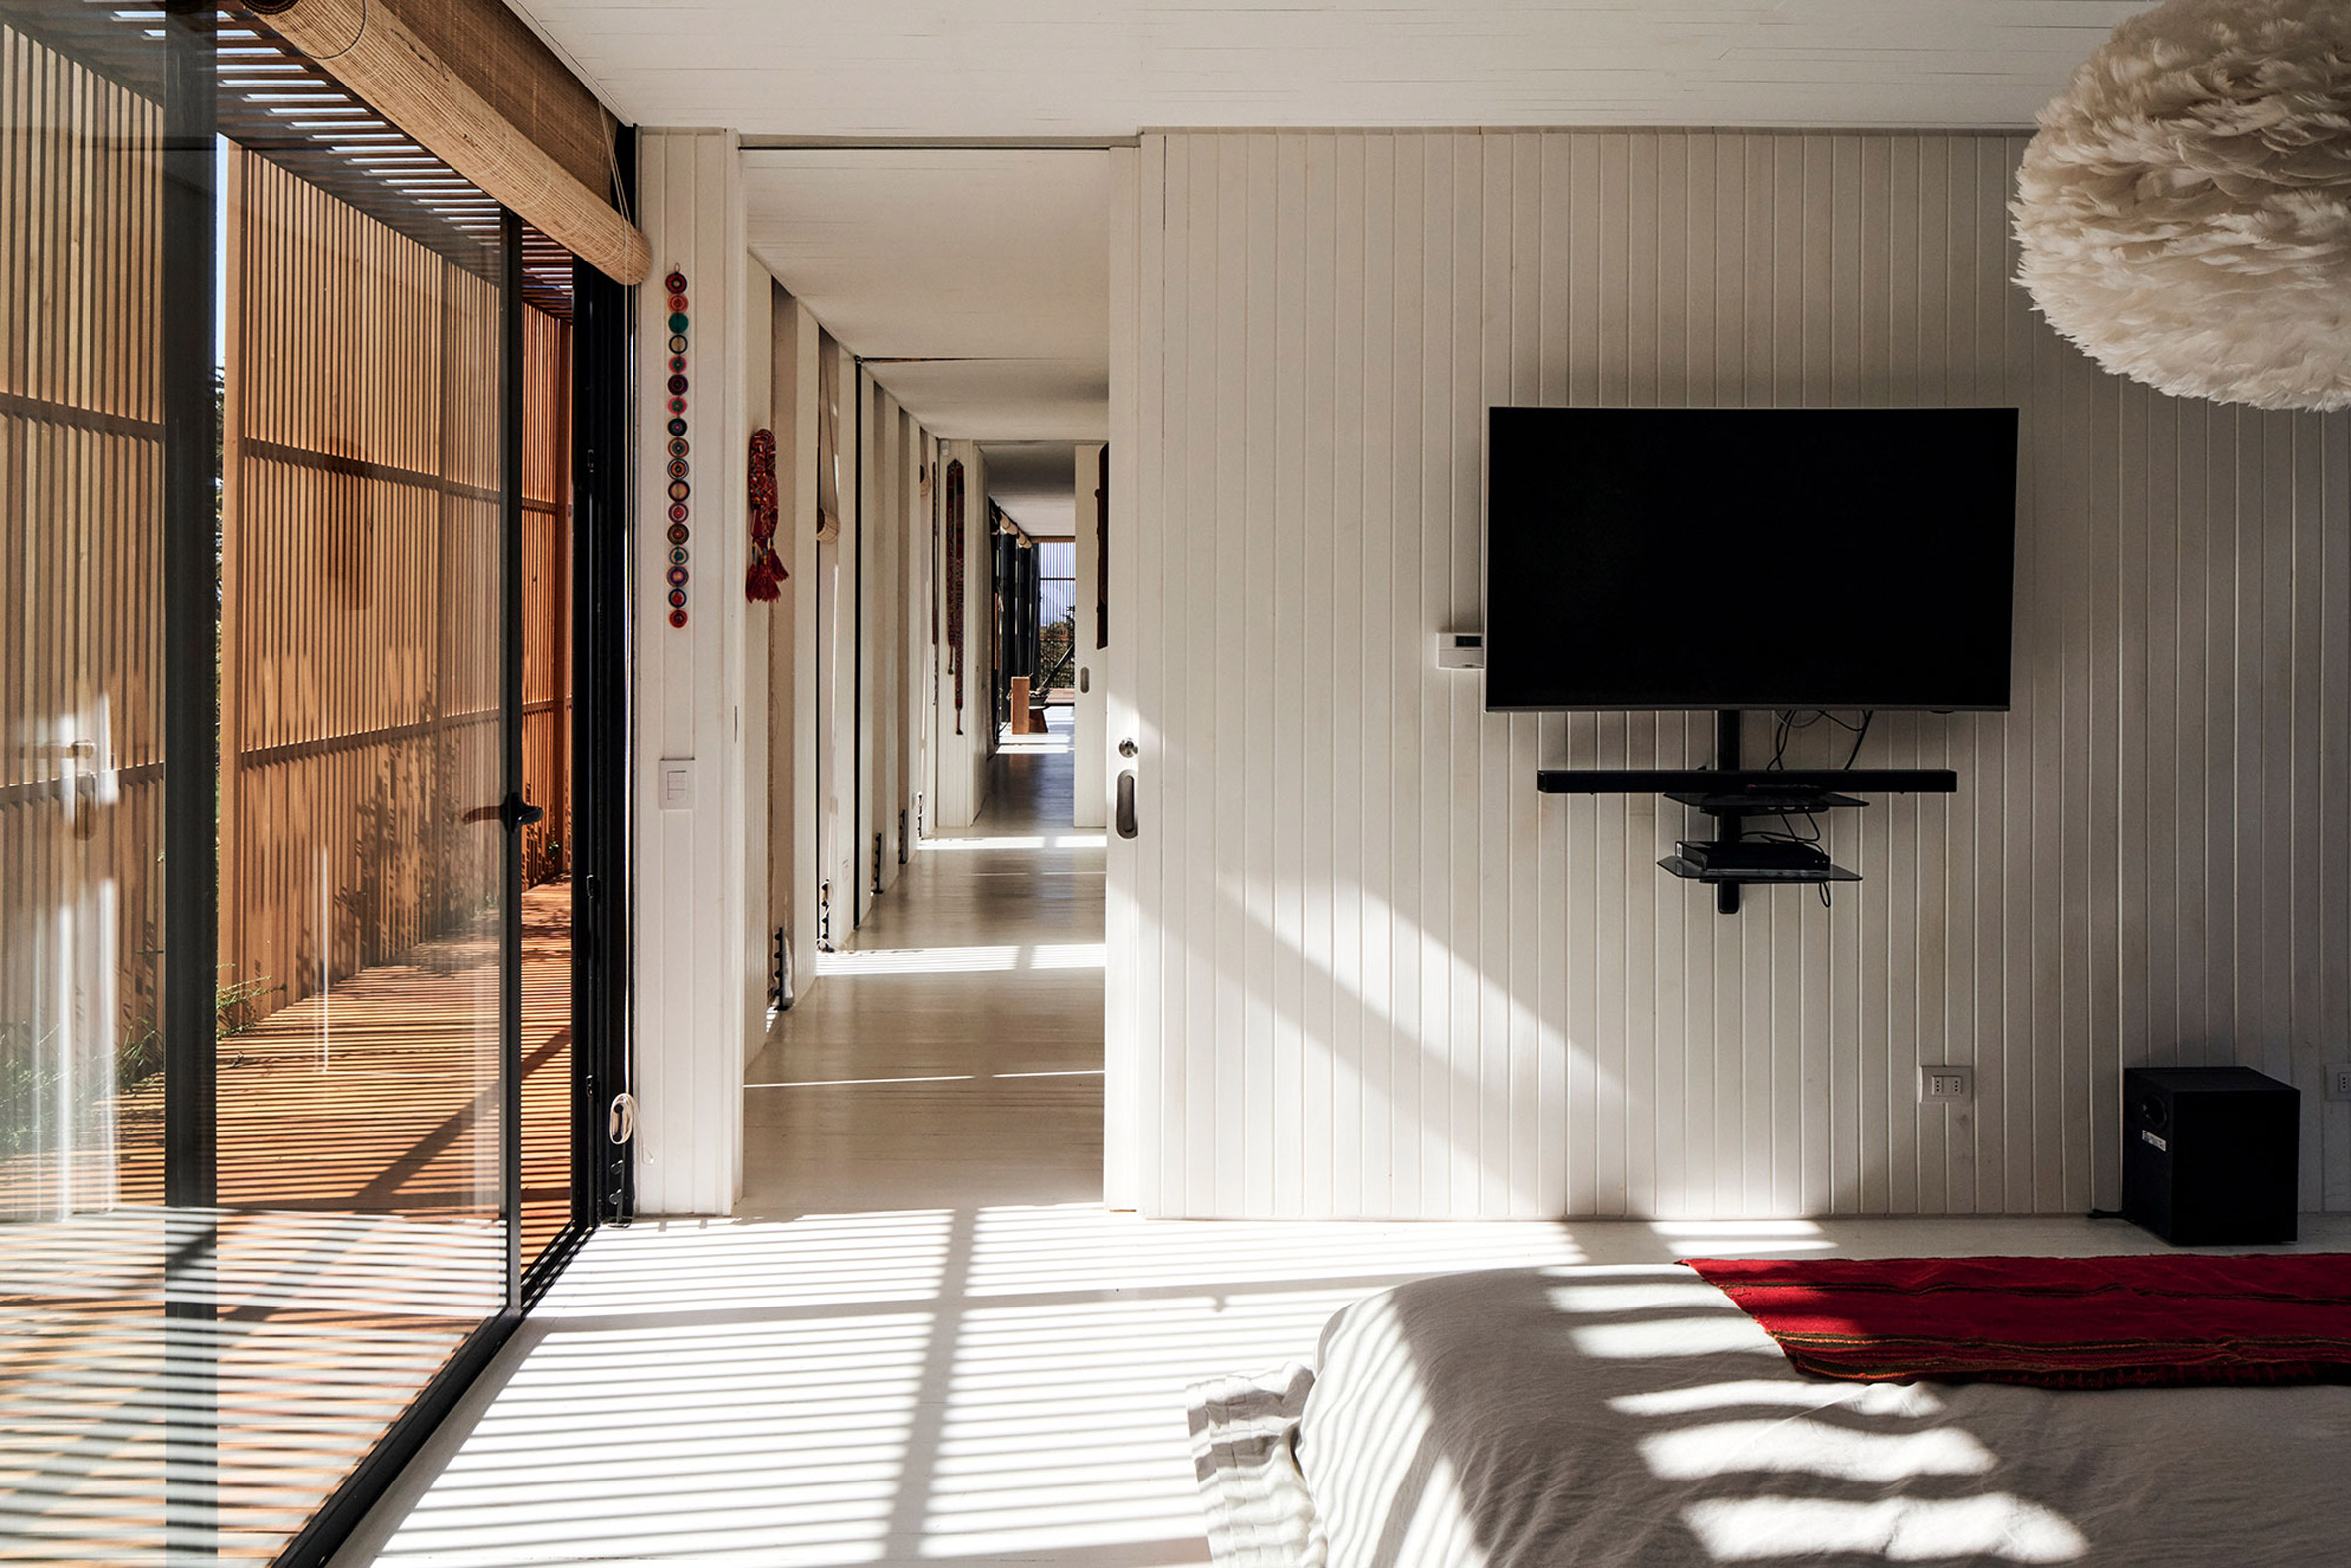 Bedroom in Engawa House by Santiago Valdivieso and Stefano Rolla